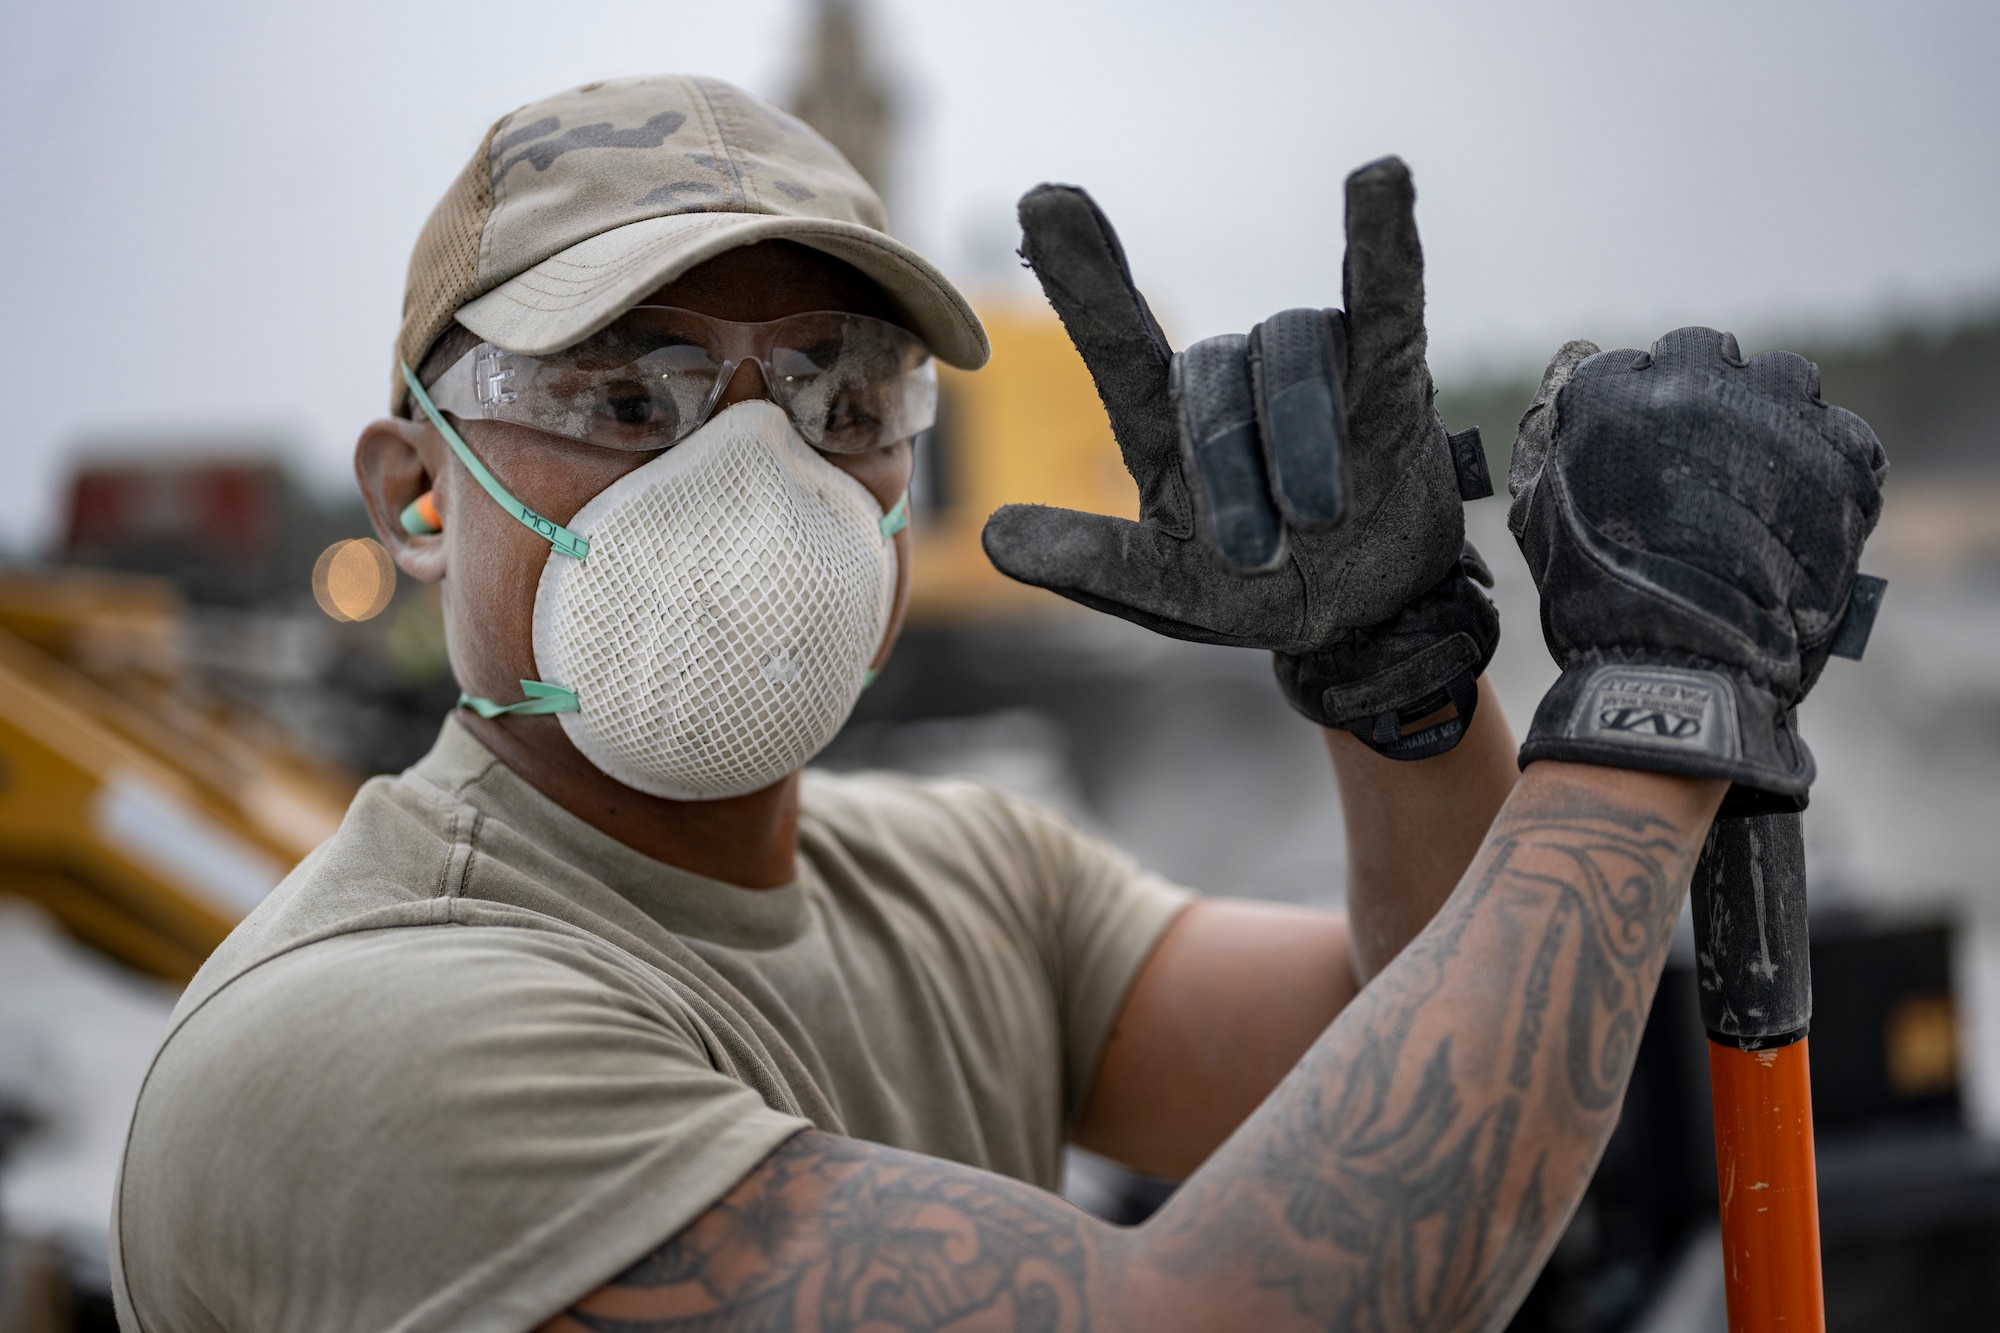 A U.S. Air Force Airman assigned to the 18th Civil Engineer Group poses for a photo during a bilateral live fire exercise.